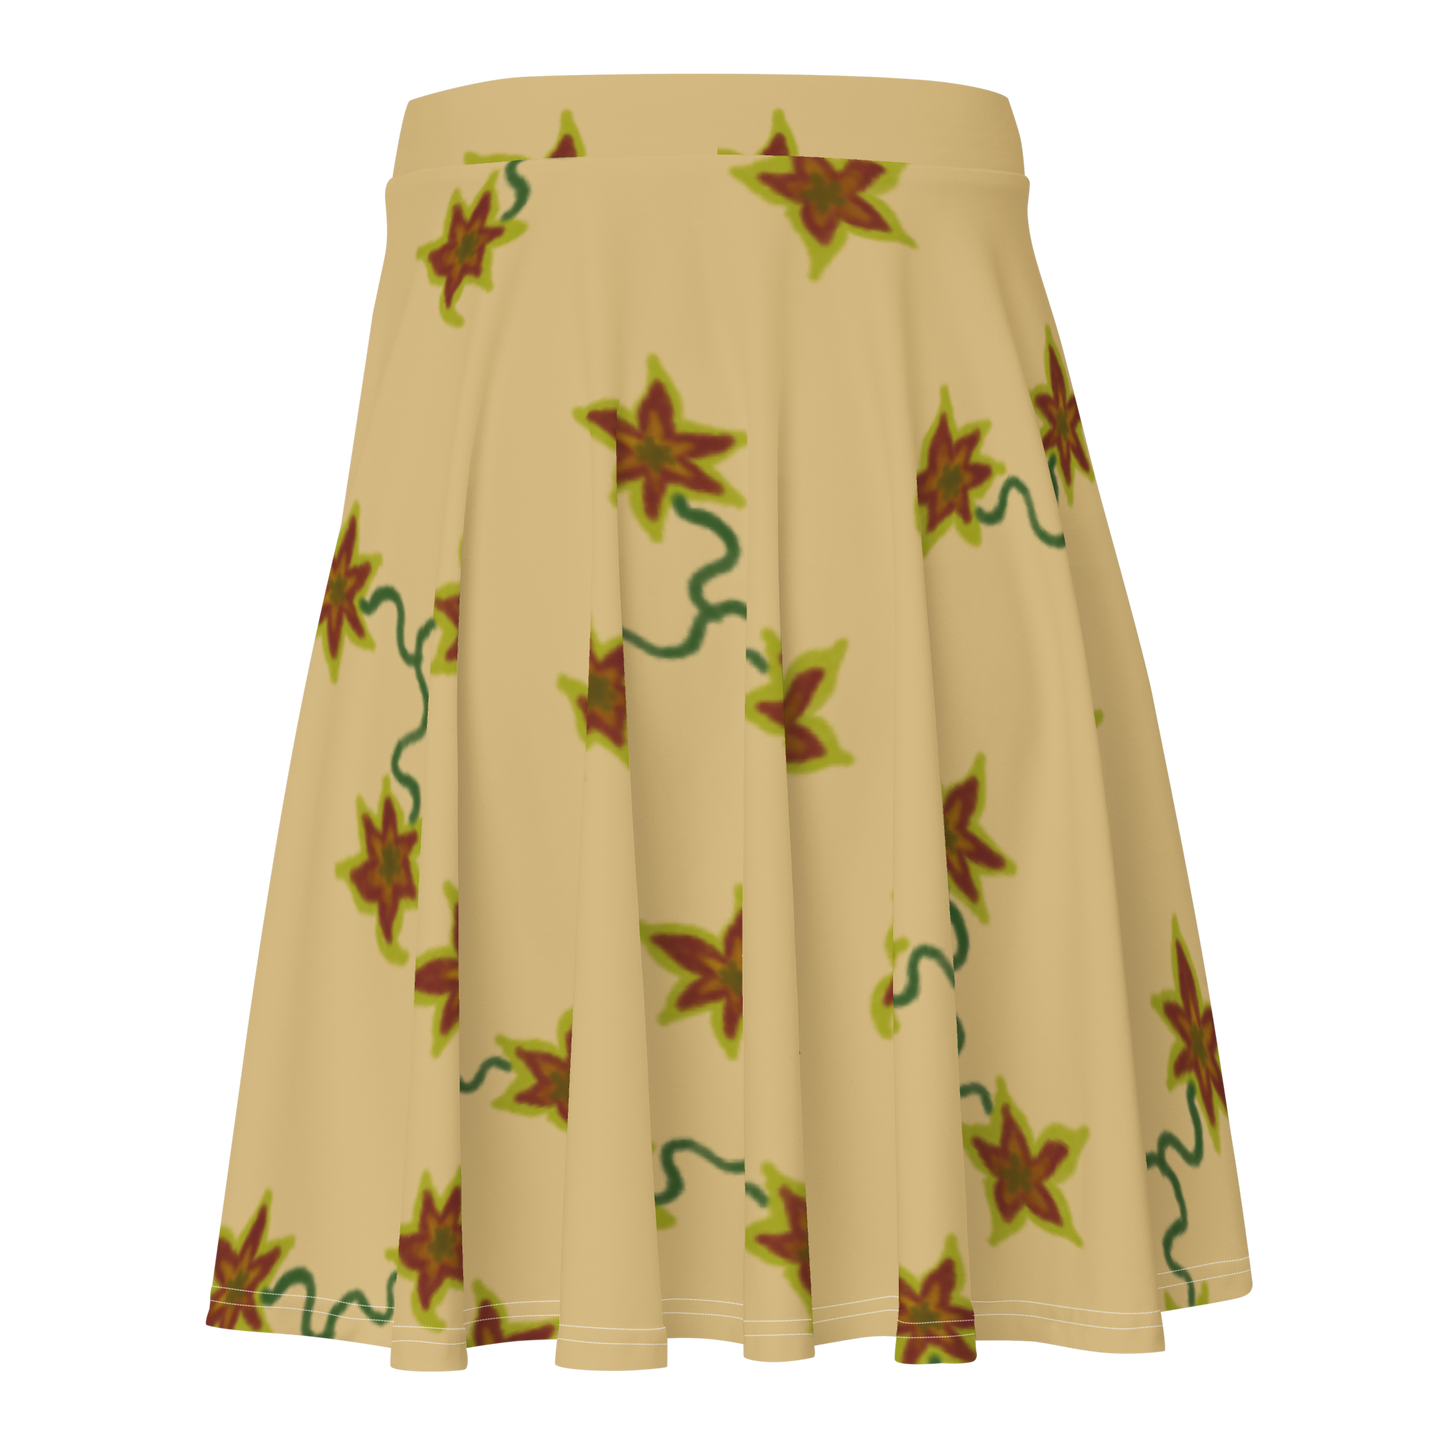 water color skirt